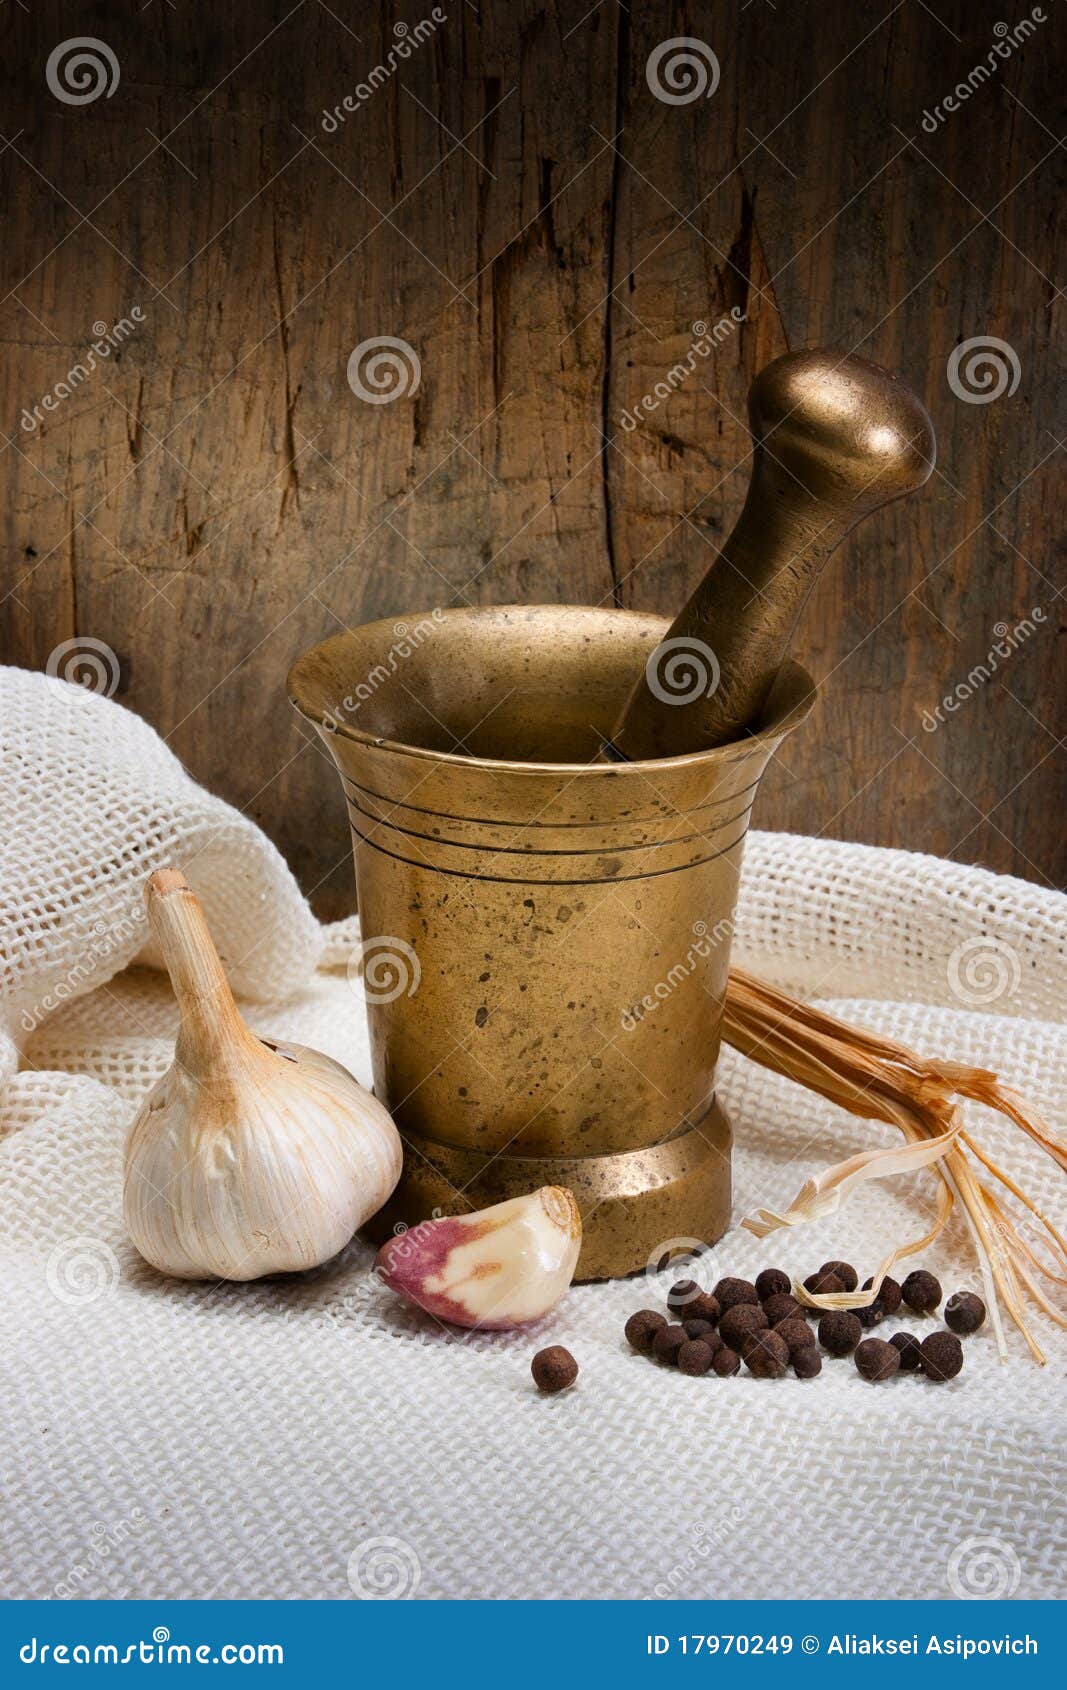 Antique Bronze Mortar and Pestle with Spice Stock Image - Image of  culinary, pepper: 17970249